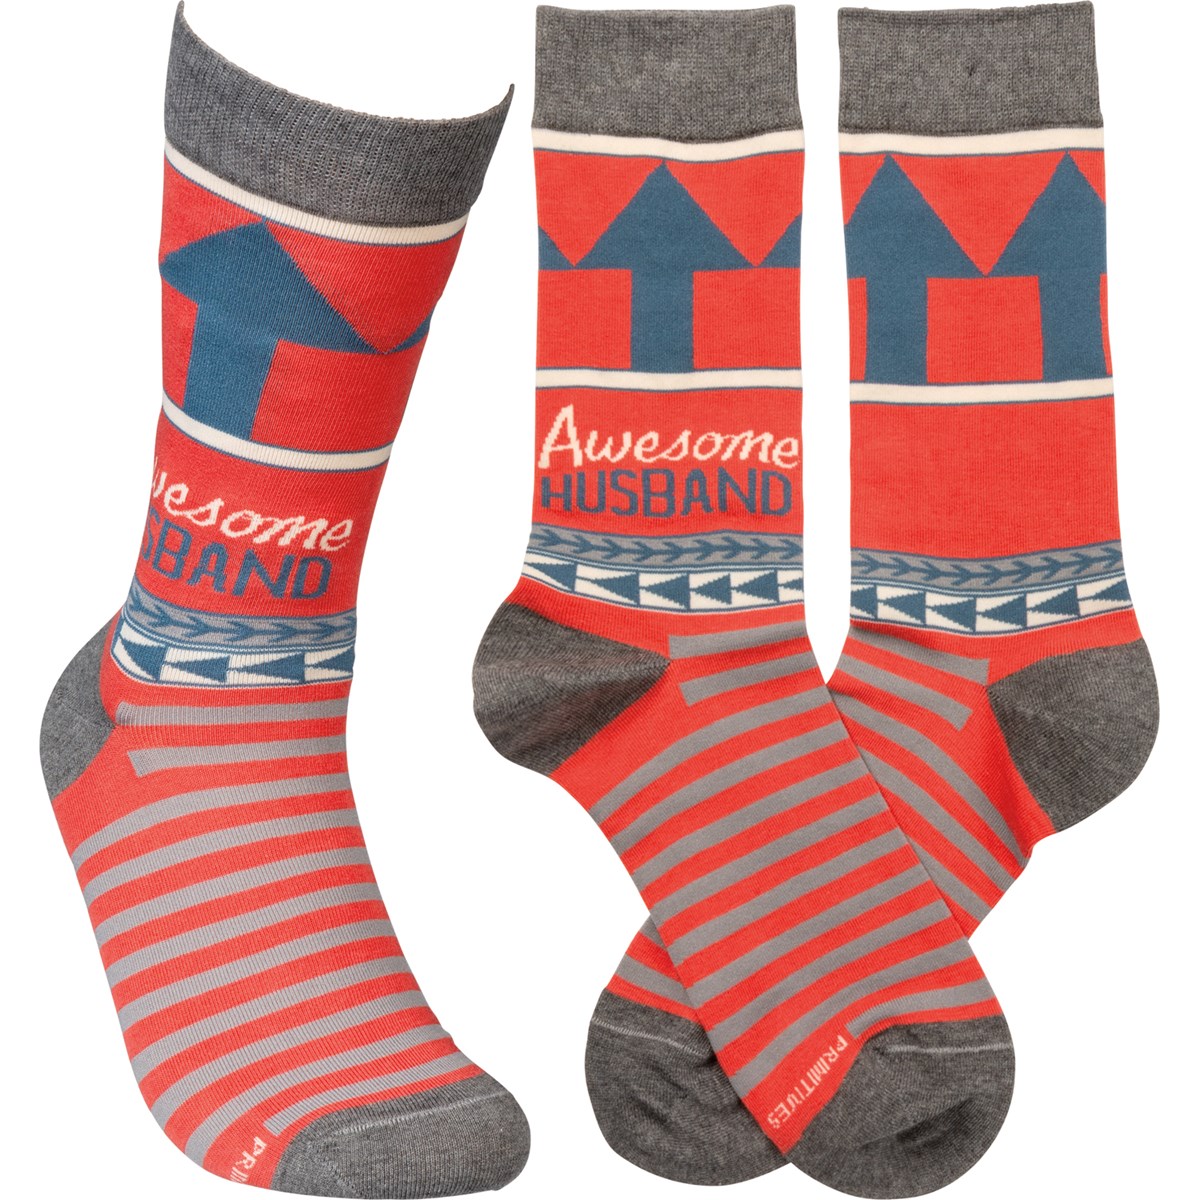 Socks - Awesome Husband - One Size Fits Most - Cotton, Nylon, Spandex